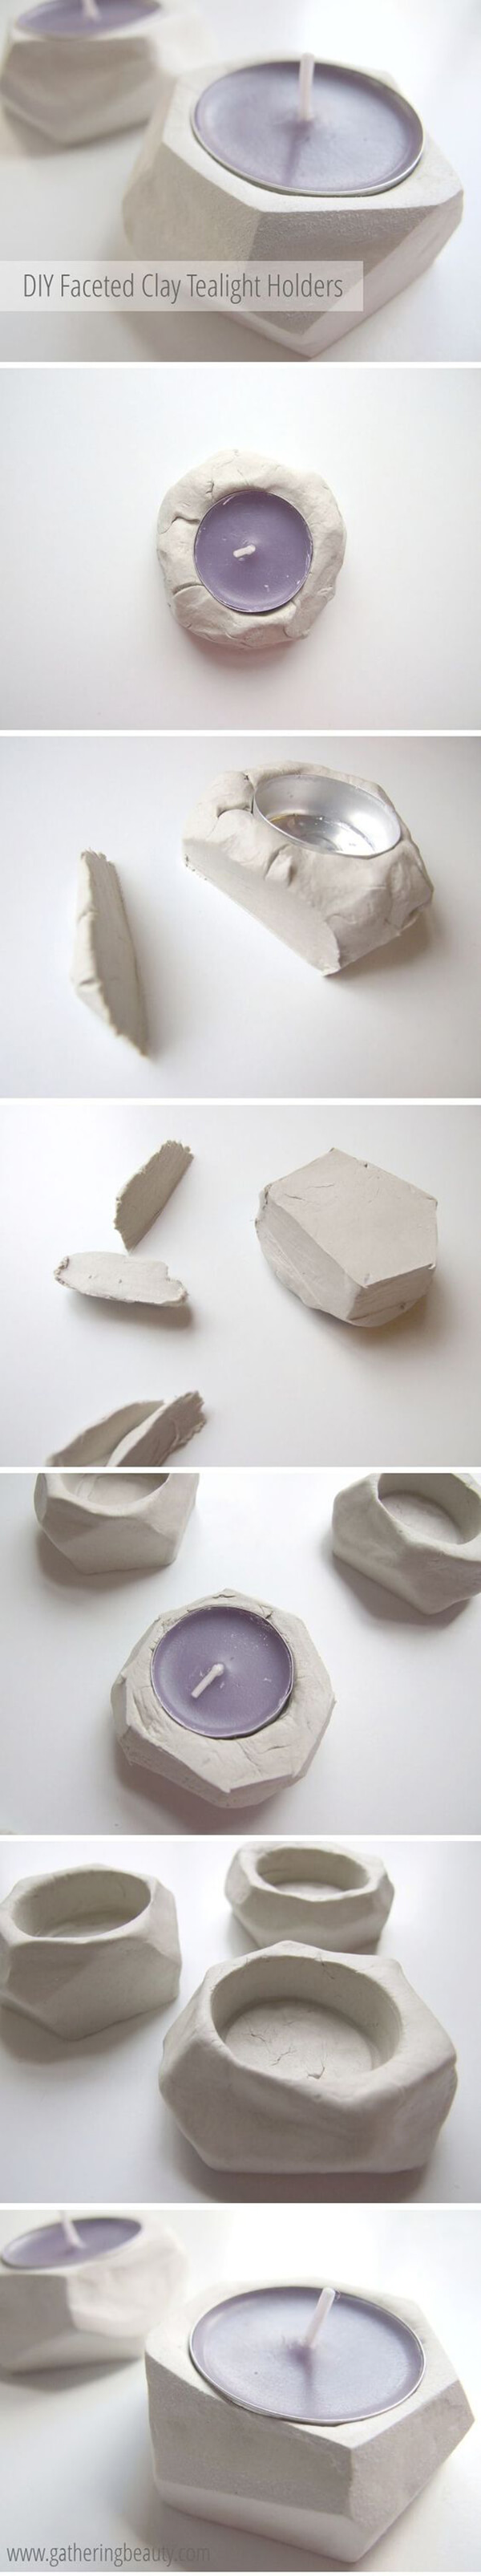 Free-Form Sculpted Clay Tea Lights